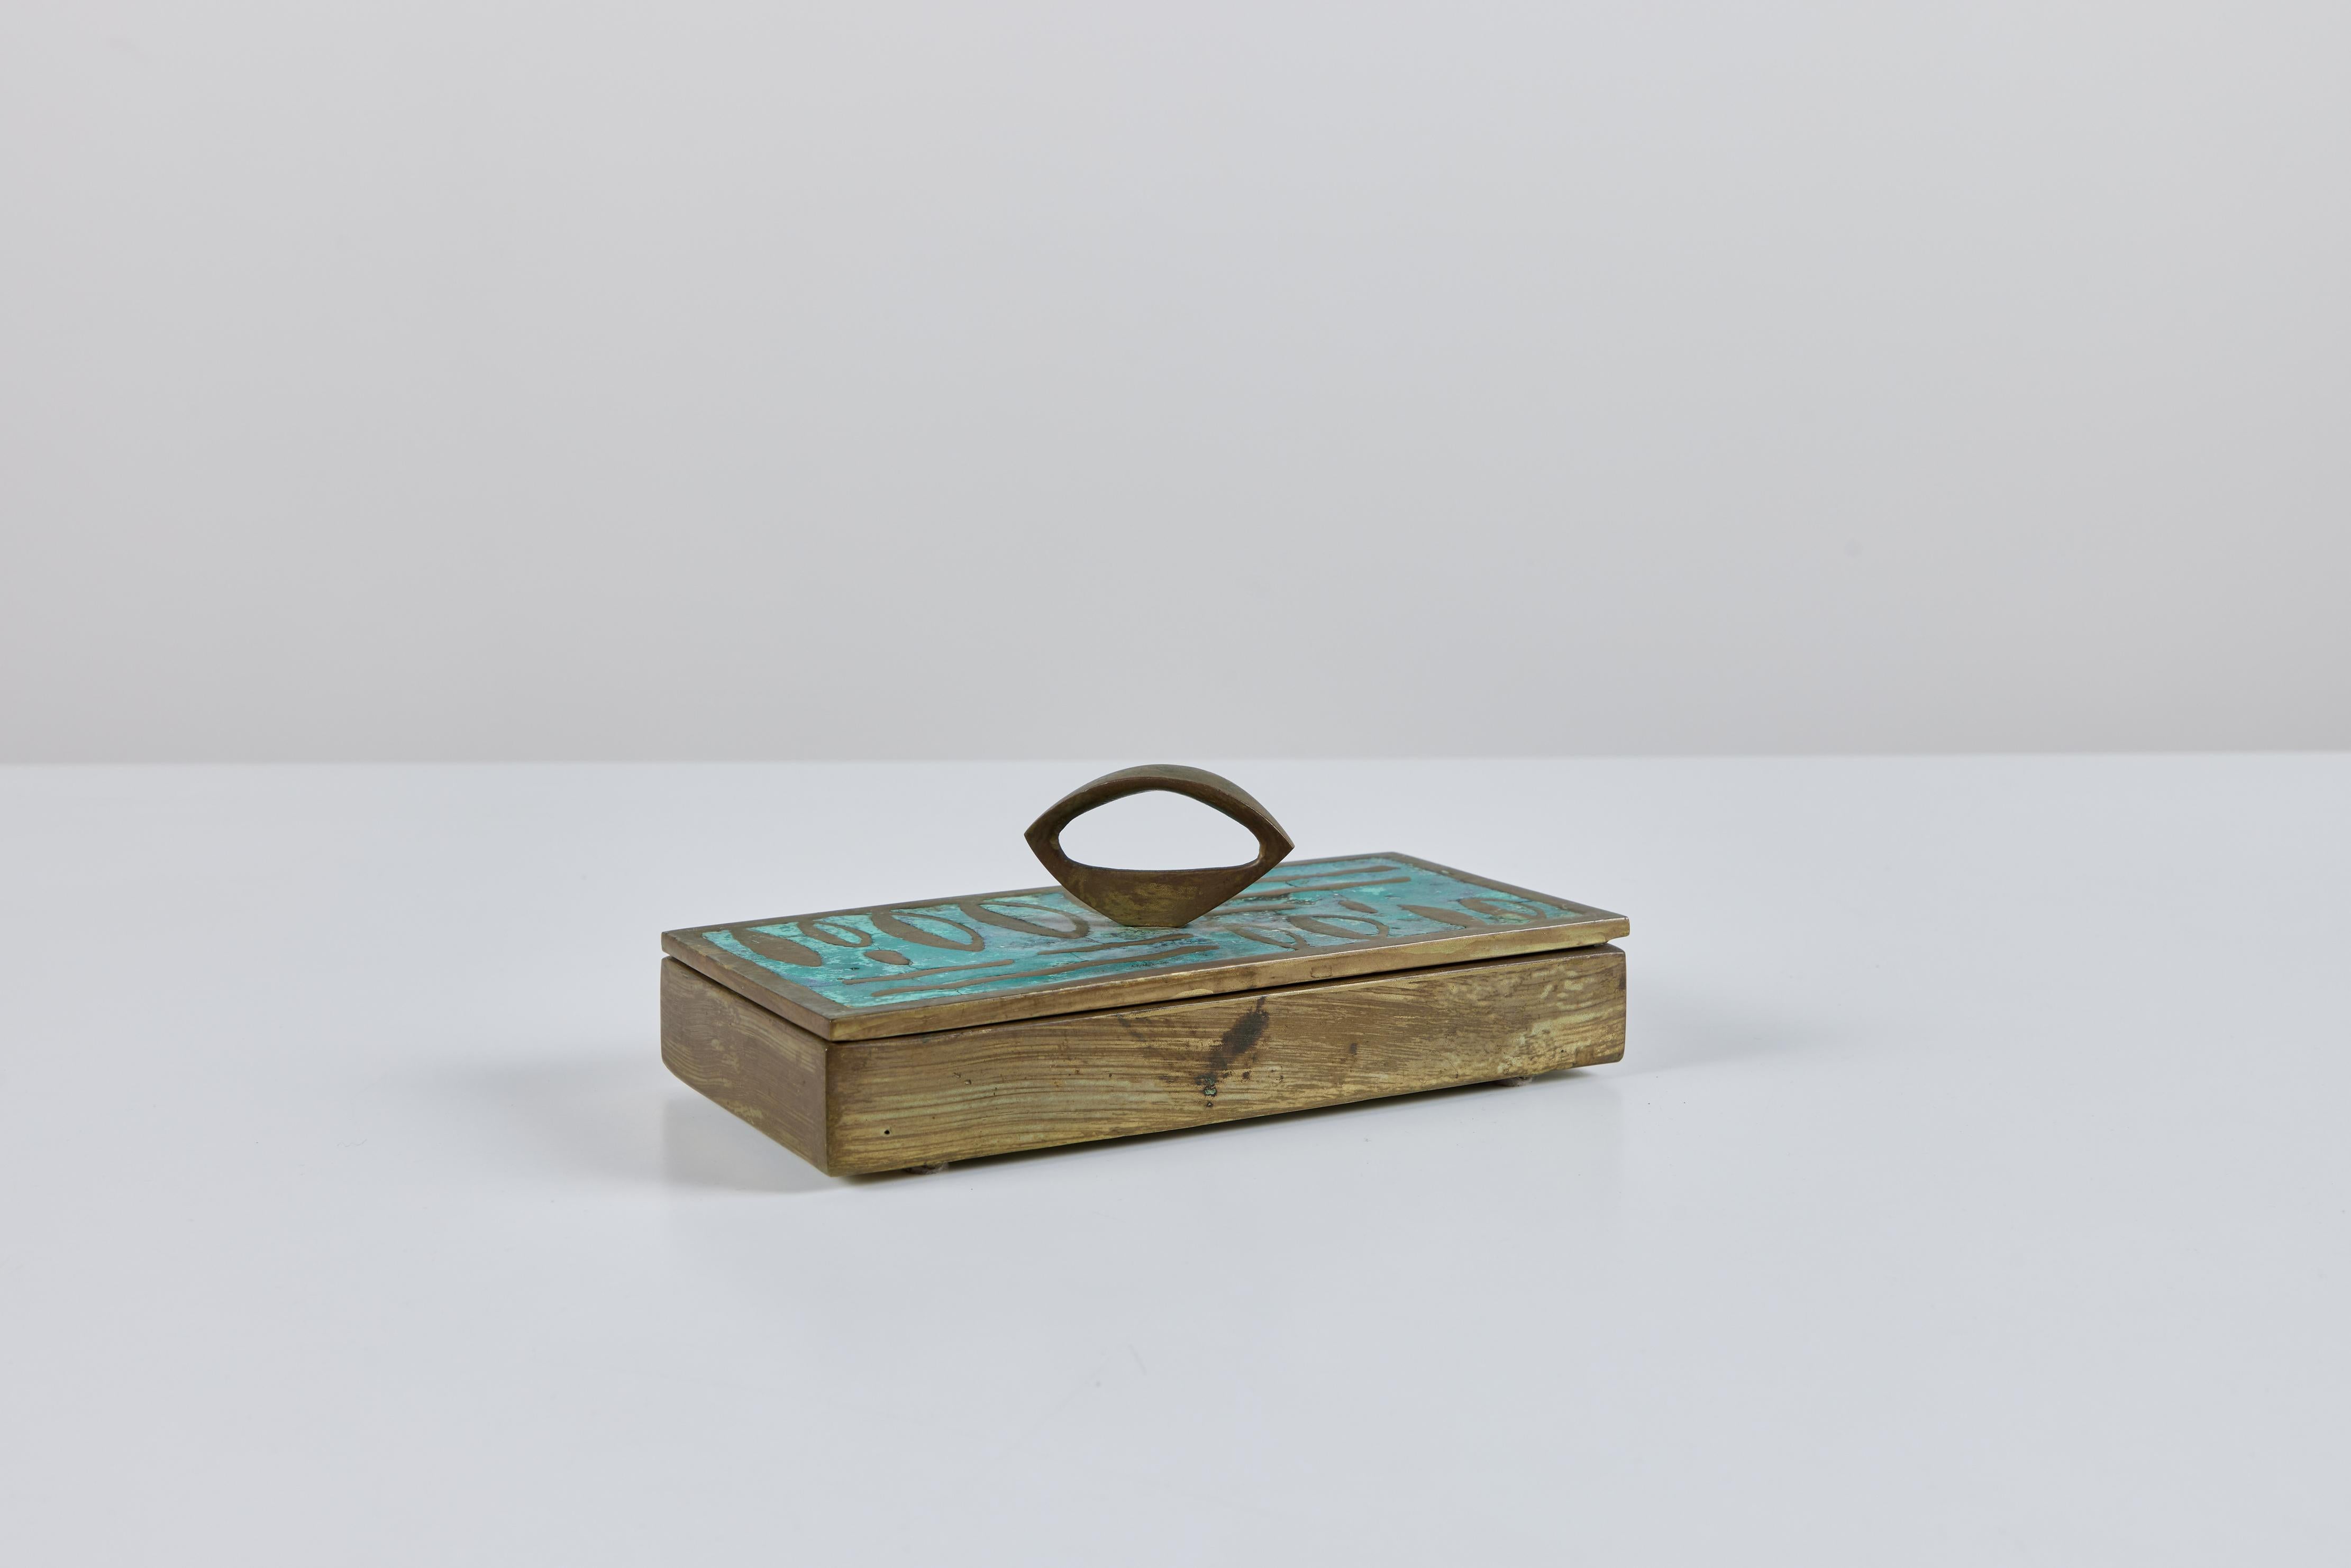 José Mendoza ran a foundry called Pepe Mendoza in the 1950s and 1960s in Mexico City, manufacturing modernist home accessories using a modified cloissonné technique more suited to the tastes of the day. 

This example is a rectangular lidded box